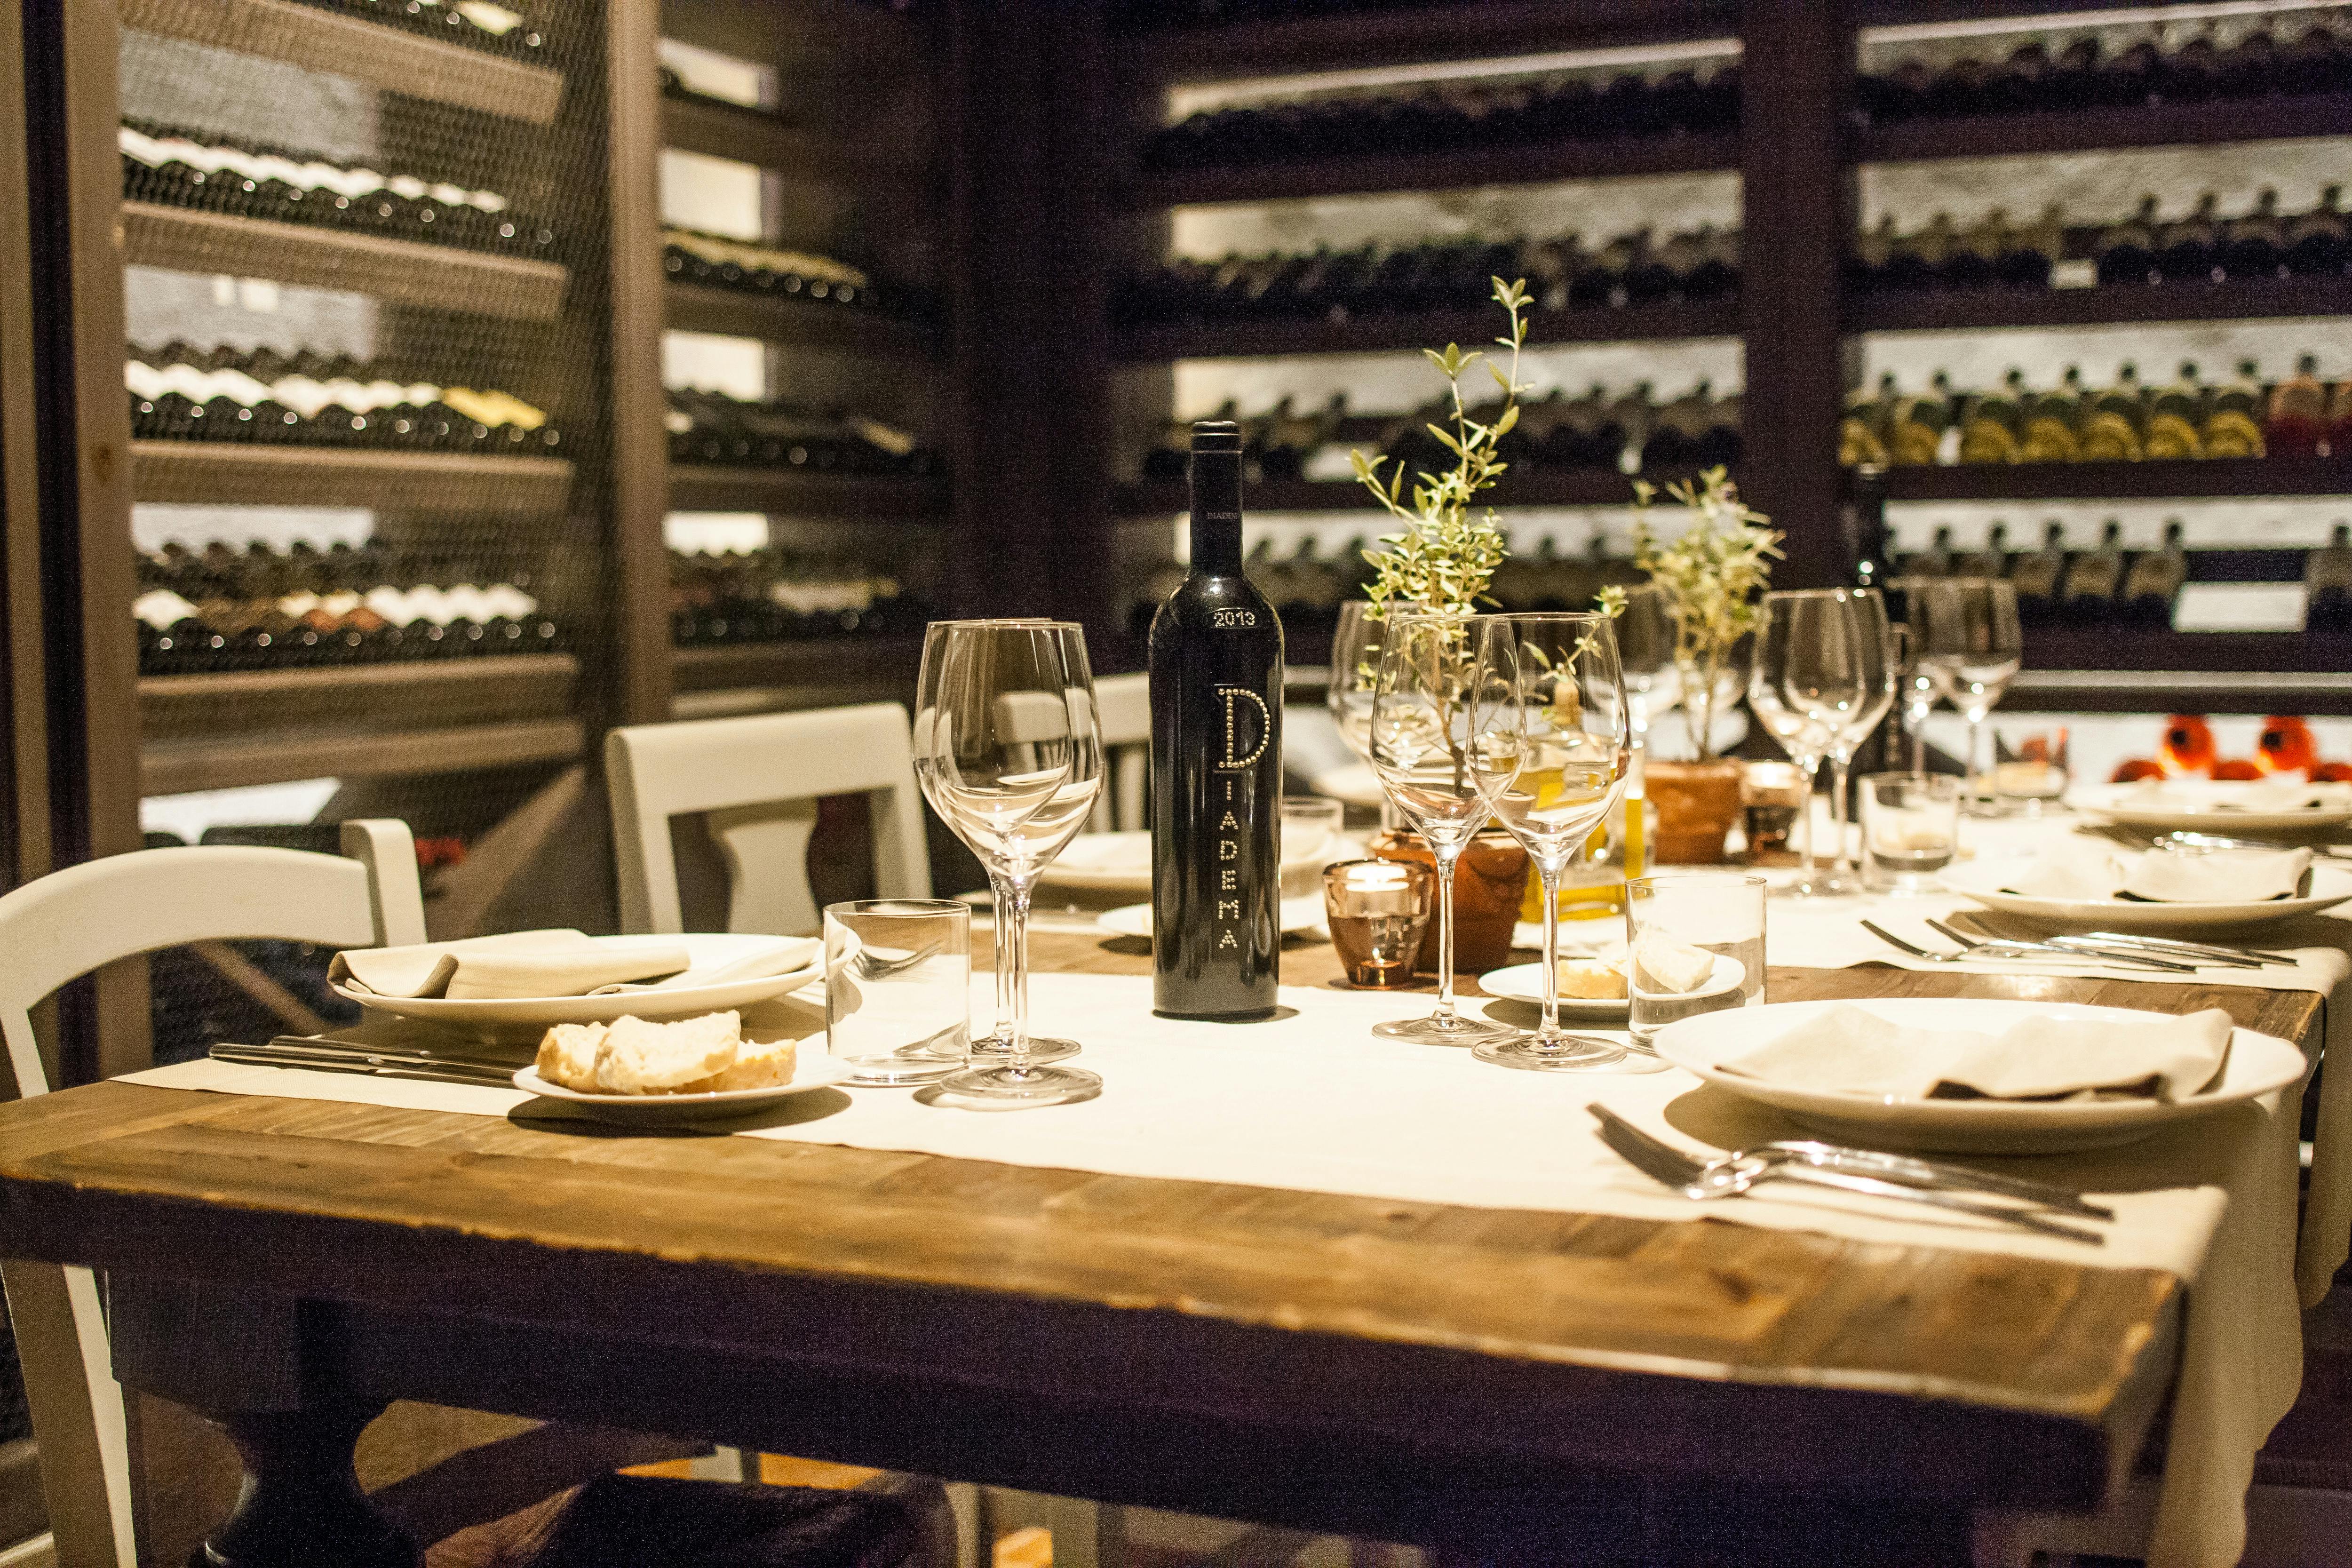 Wine-making experience and gourmet dinner at a Tuscan winery boutique